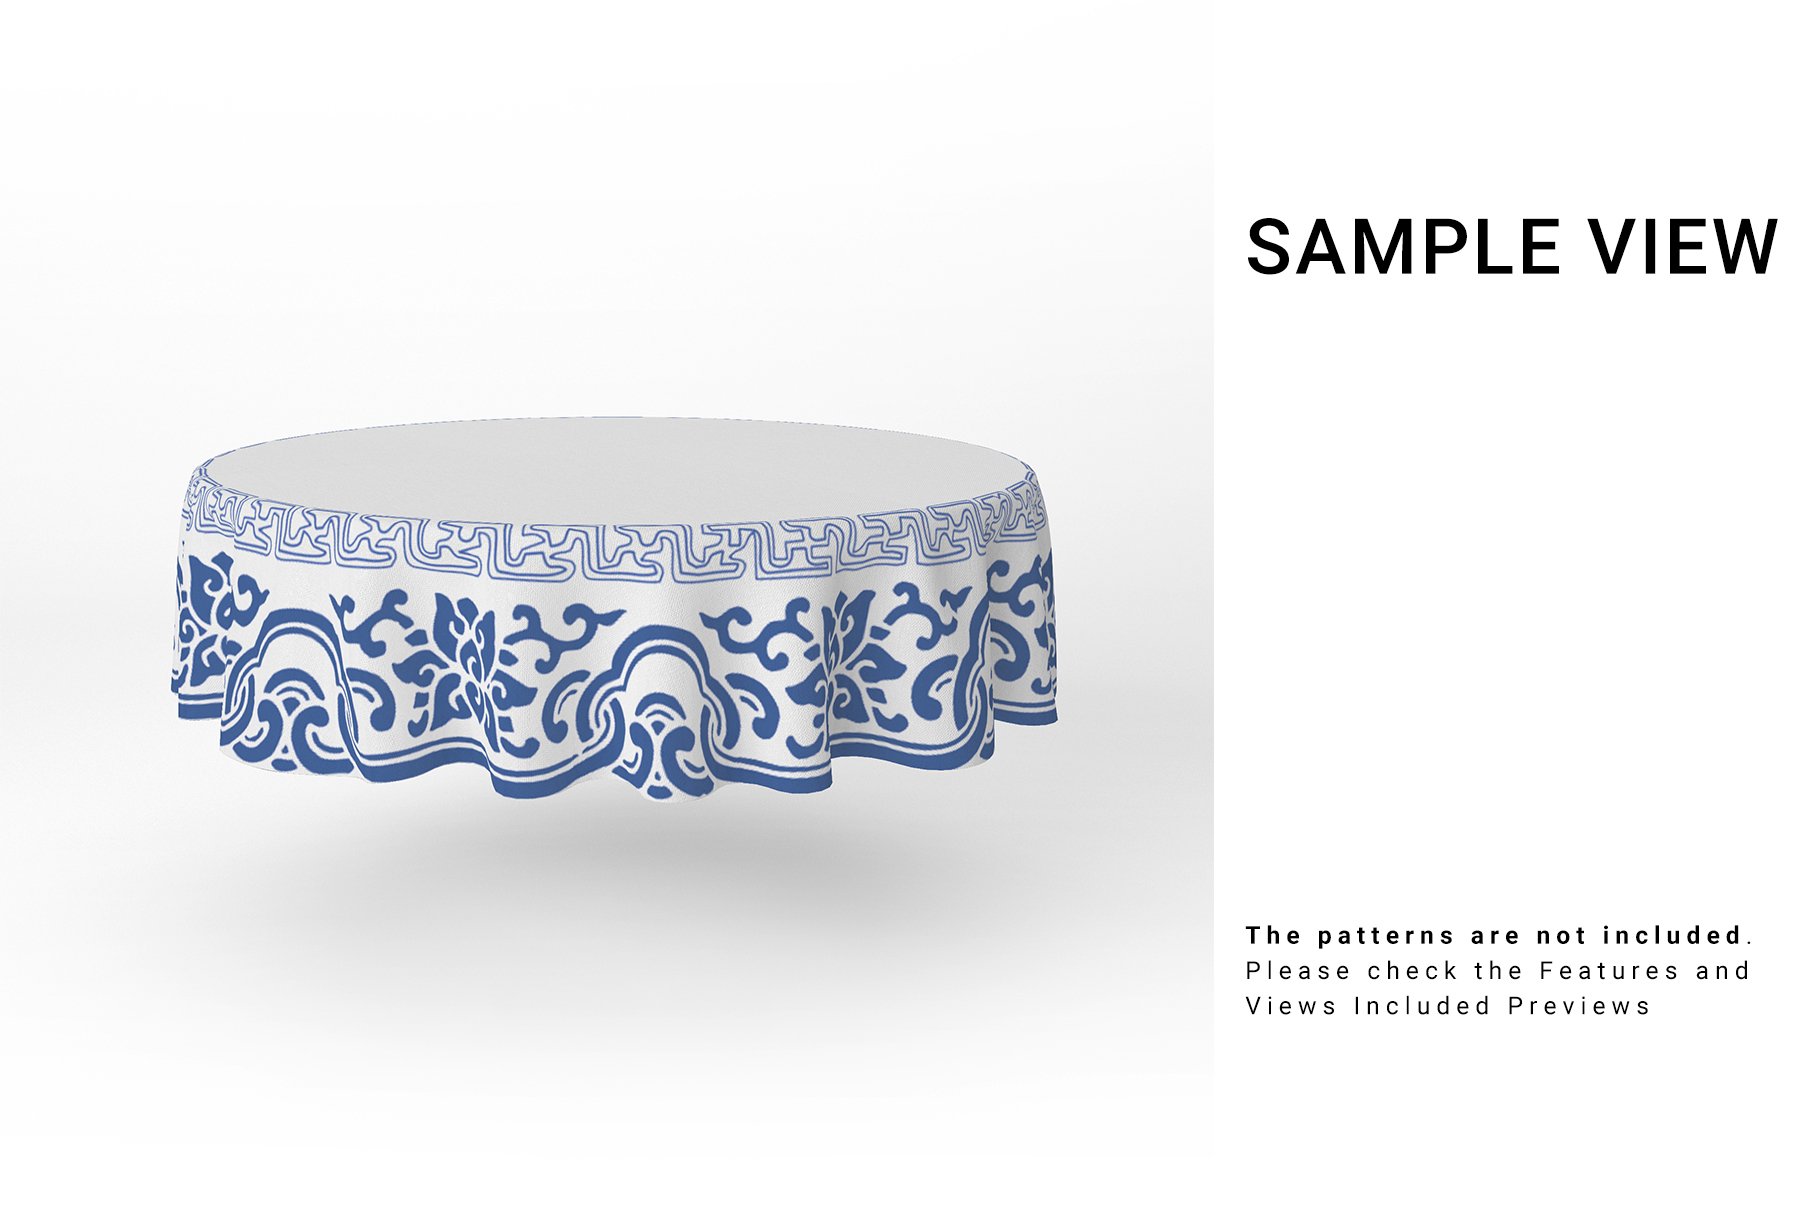 Round Tablecloth Mockup